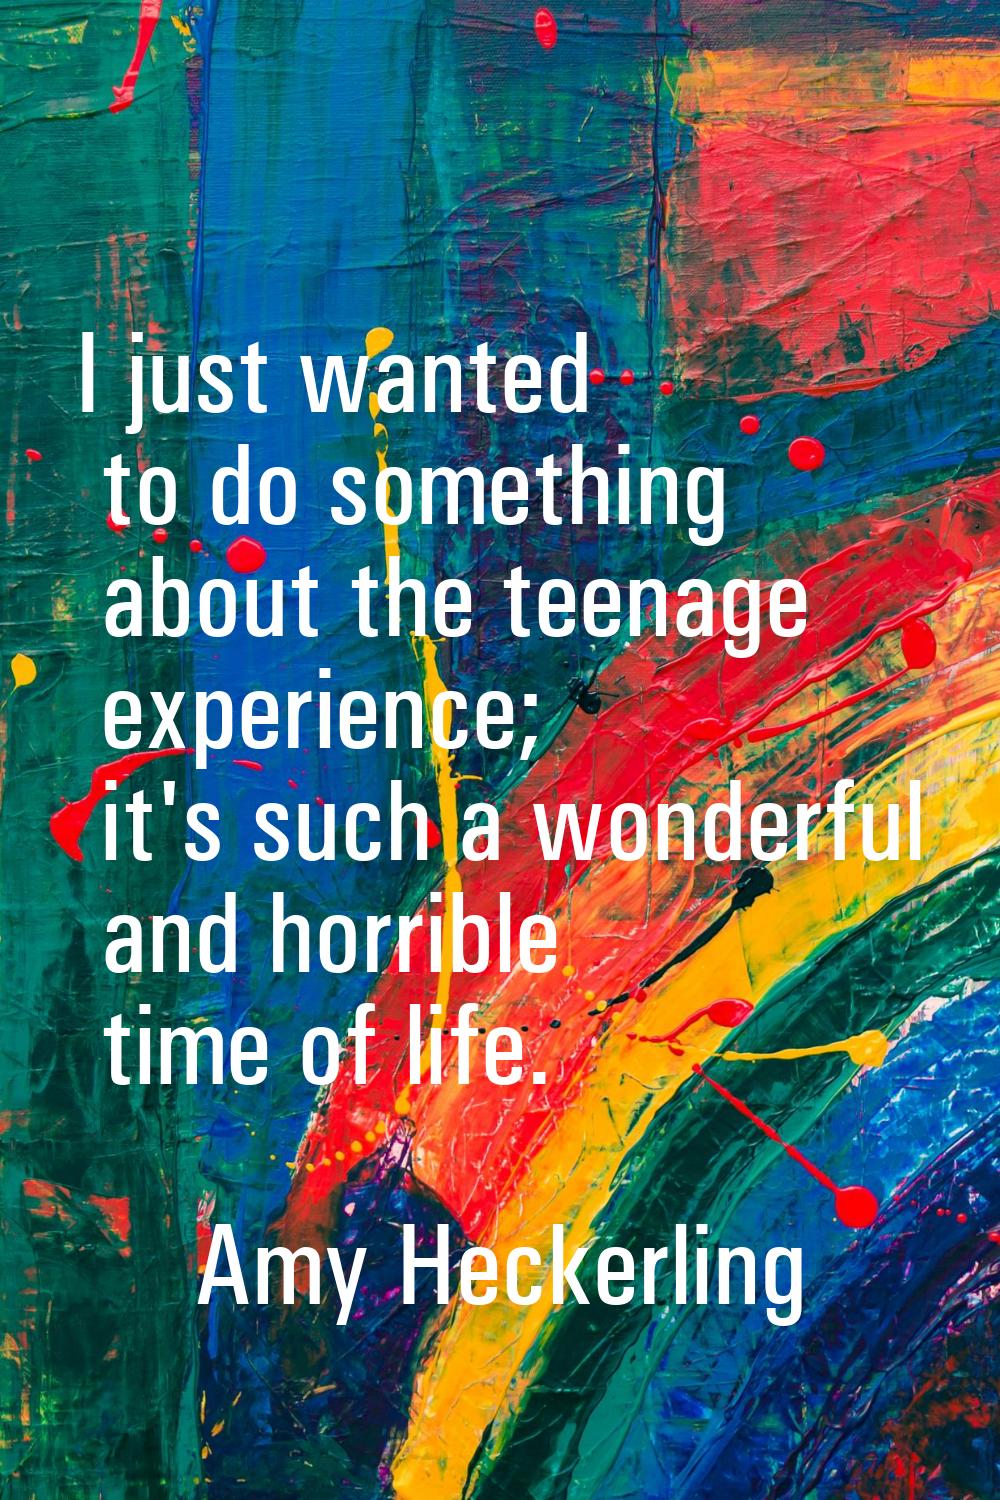 I just wanted to do something about the teenage experience; it's such a wonderful and horrible time